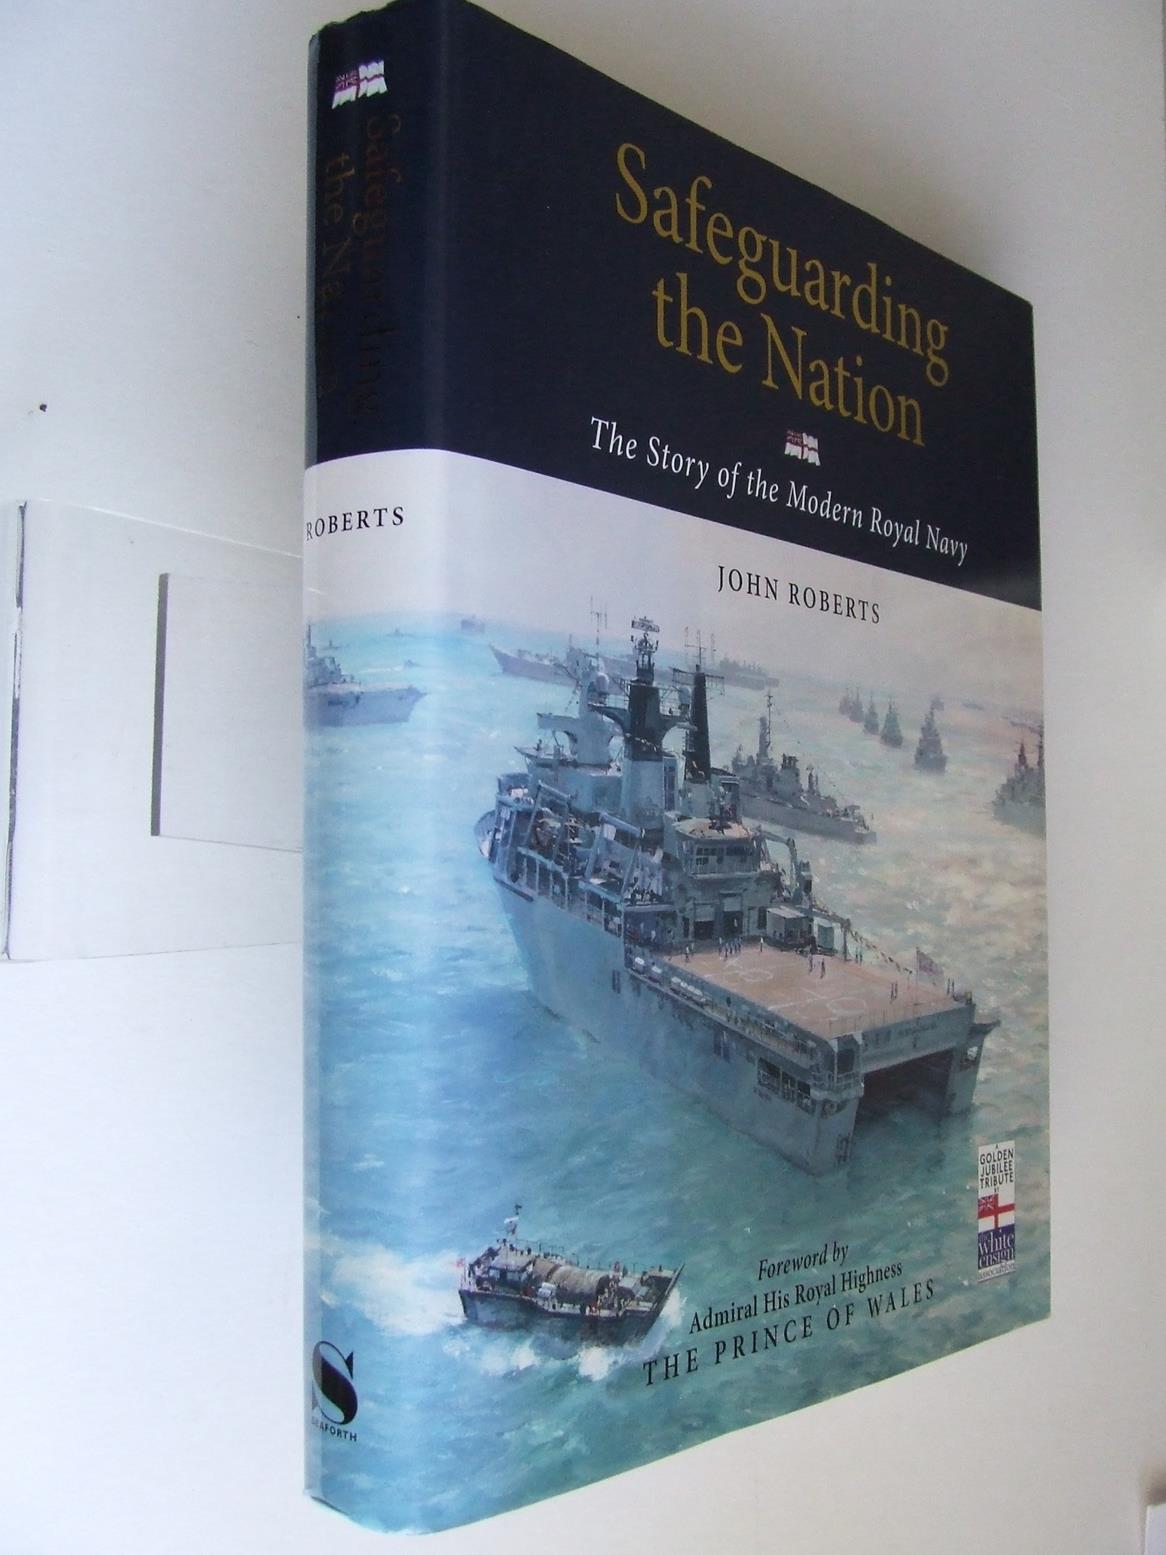 Safeguarding the Nation, the story of the modern Royal Navy